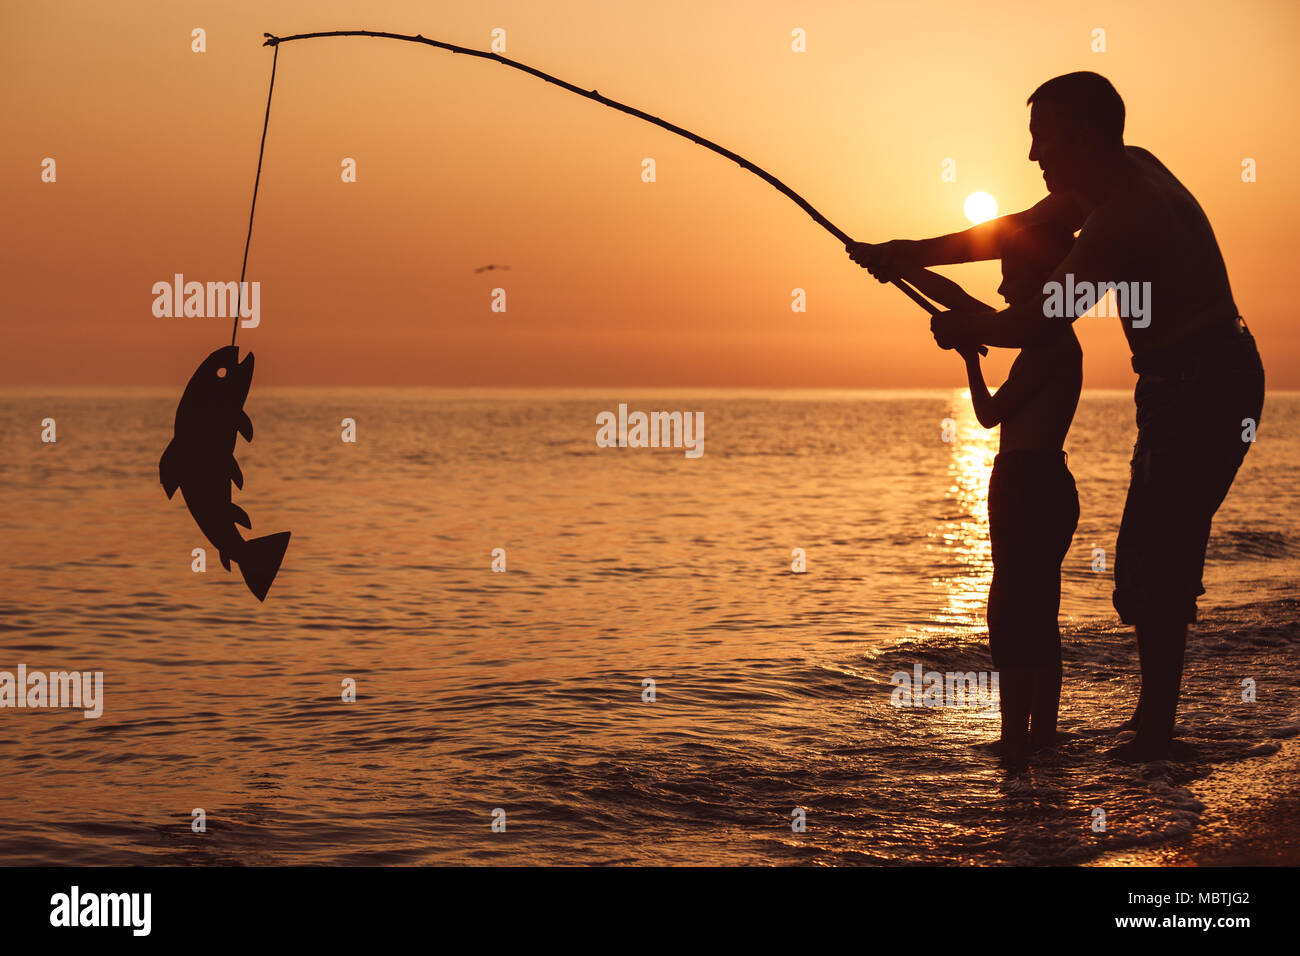 Father and son fishing on the beach at the sunset time. They playing with a cardboard fish. People having fun outdoors. Concept of summer vacation and Stock Photo